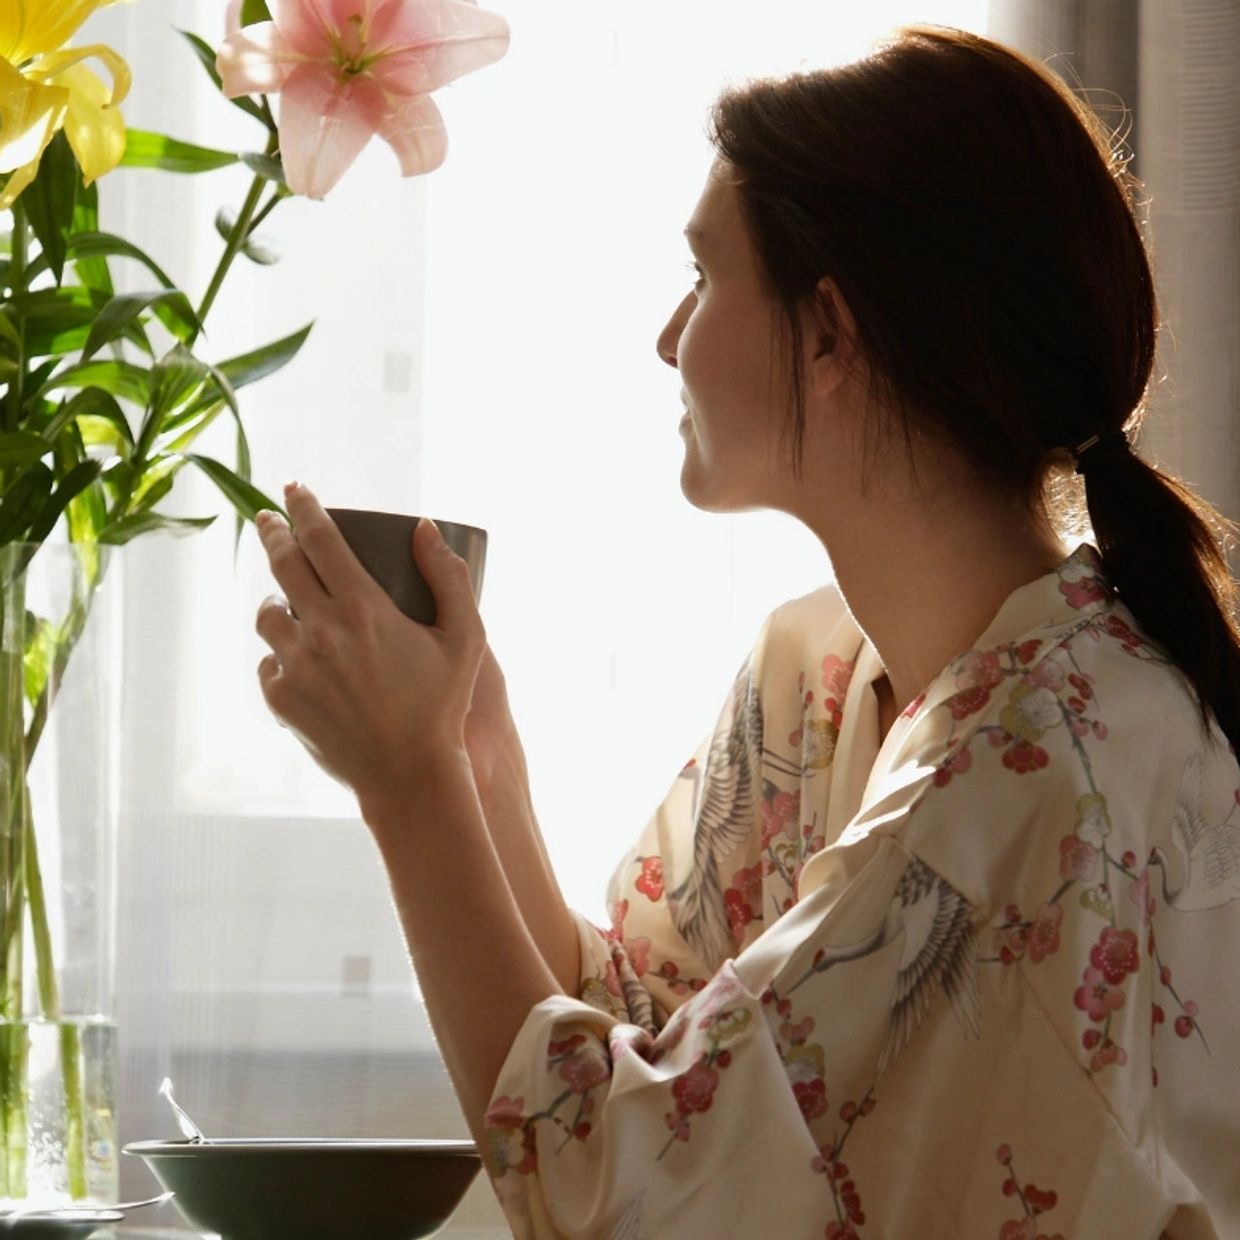 A woman holding a tea mug and looking out the window while sitting at a table with pink flowers.